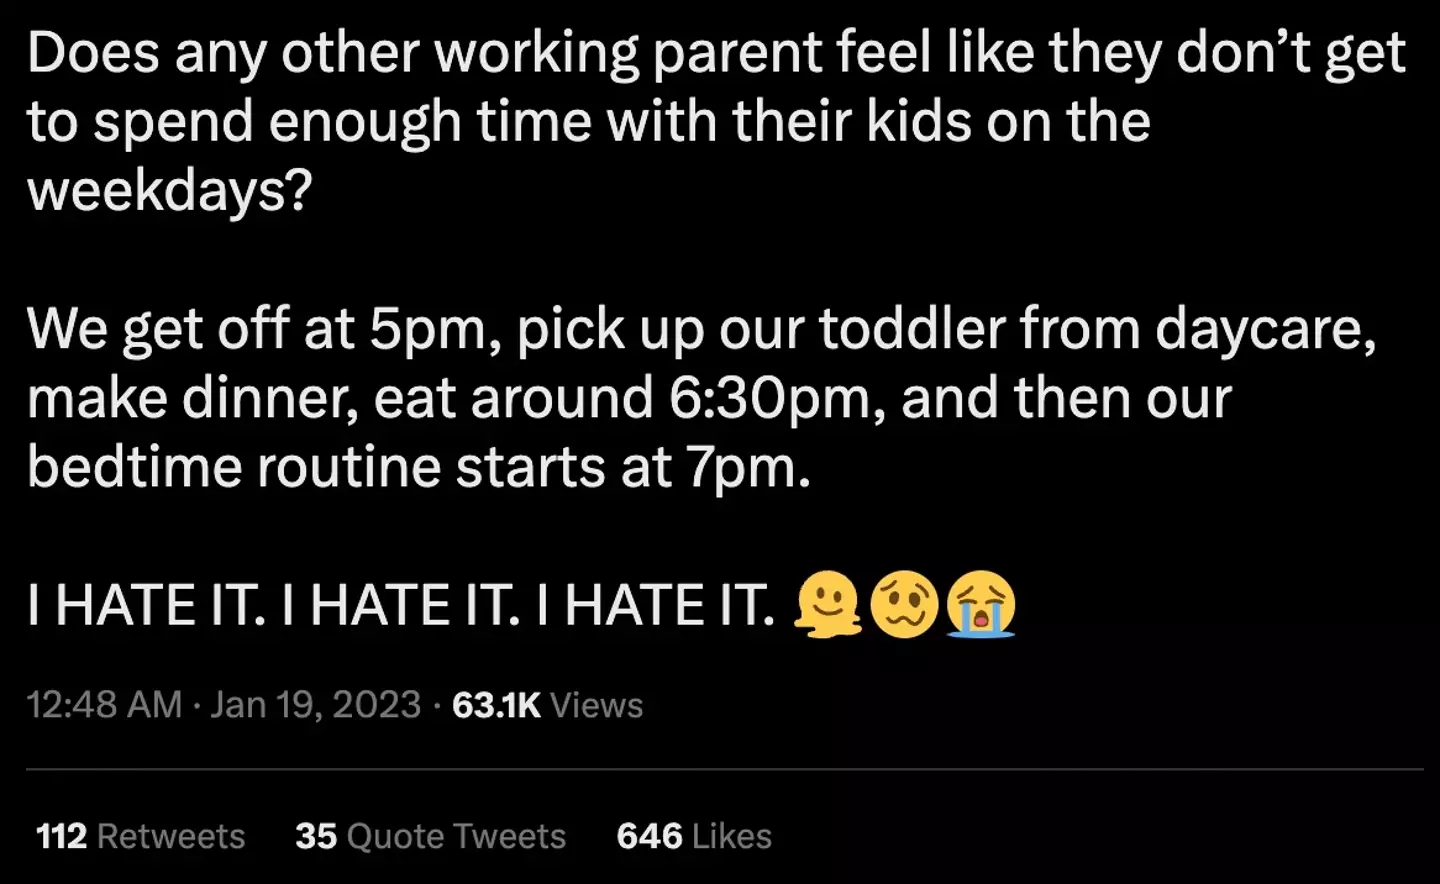 A mum says she 'hates' not being able to spend enough time with her child.